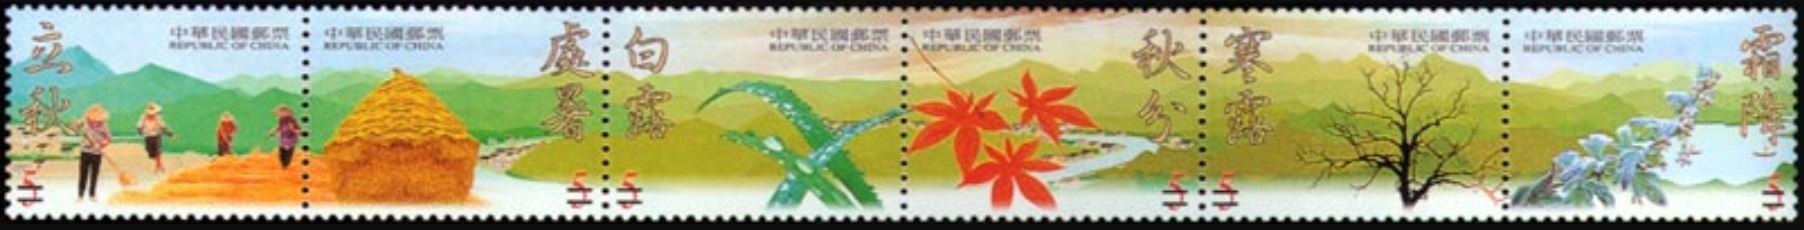 Special 410 24 Seasonal Periods Postage Stamps-Autumn 